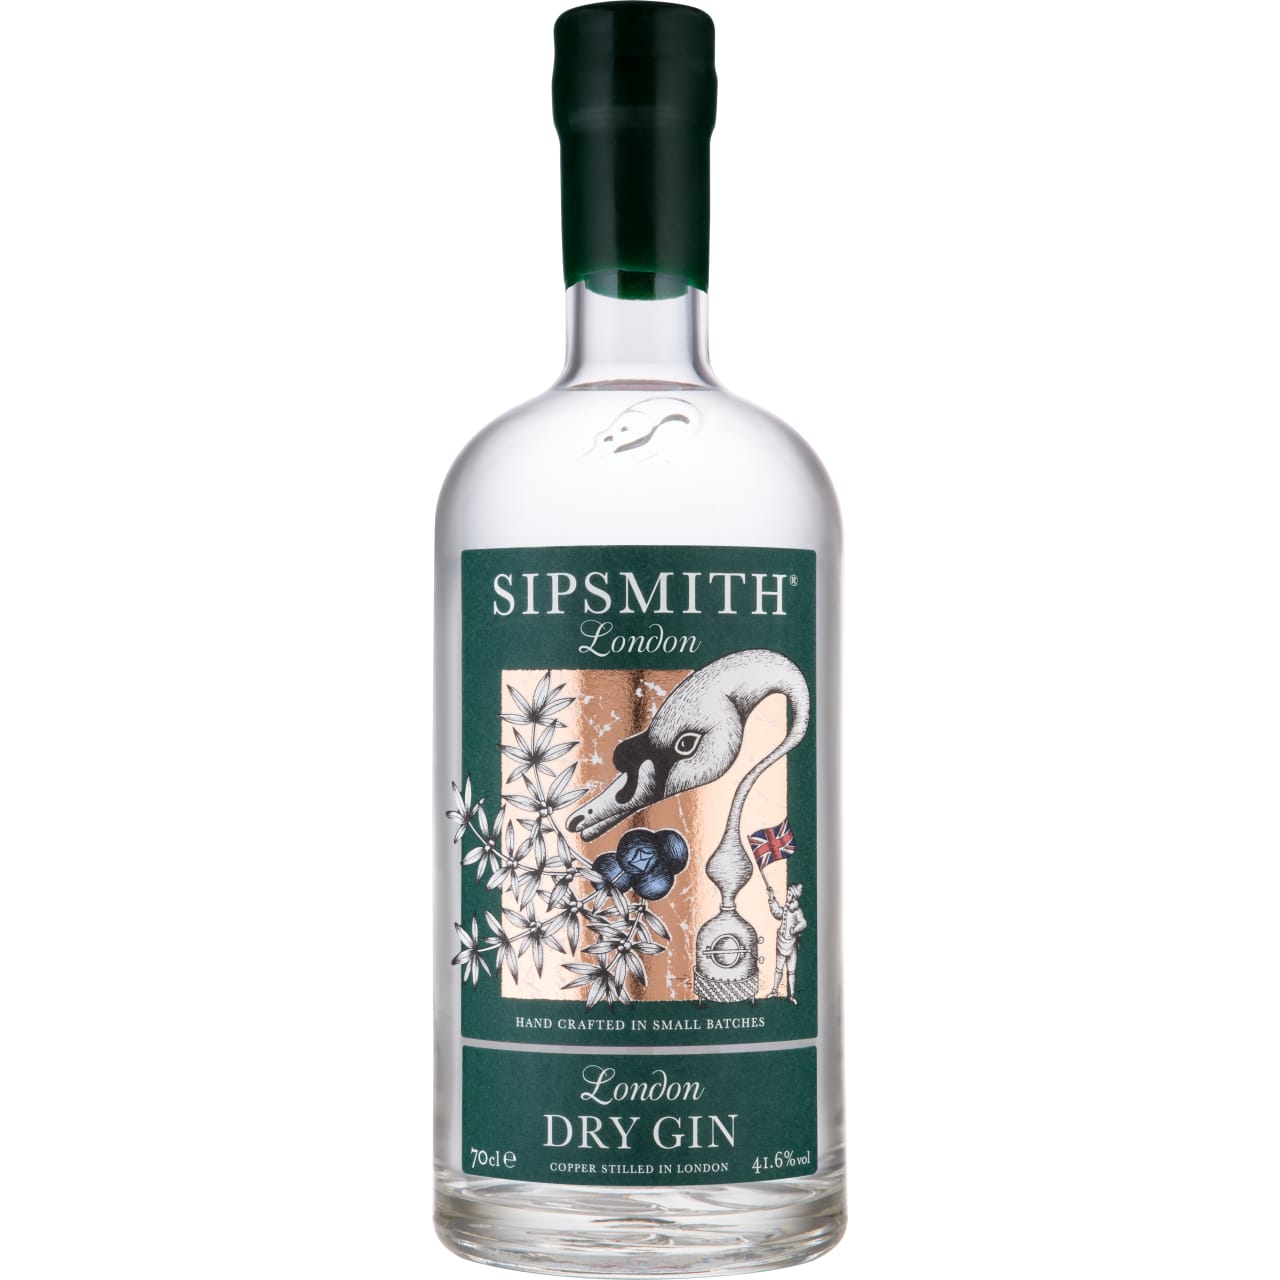 Ten carefully selected botanicals from around the globe are used to make this London Dry Gin. Floral, summer meadow notes, followed by mellow rounded juniper and zesty, citrus freshness on the nose.